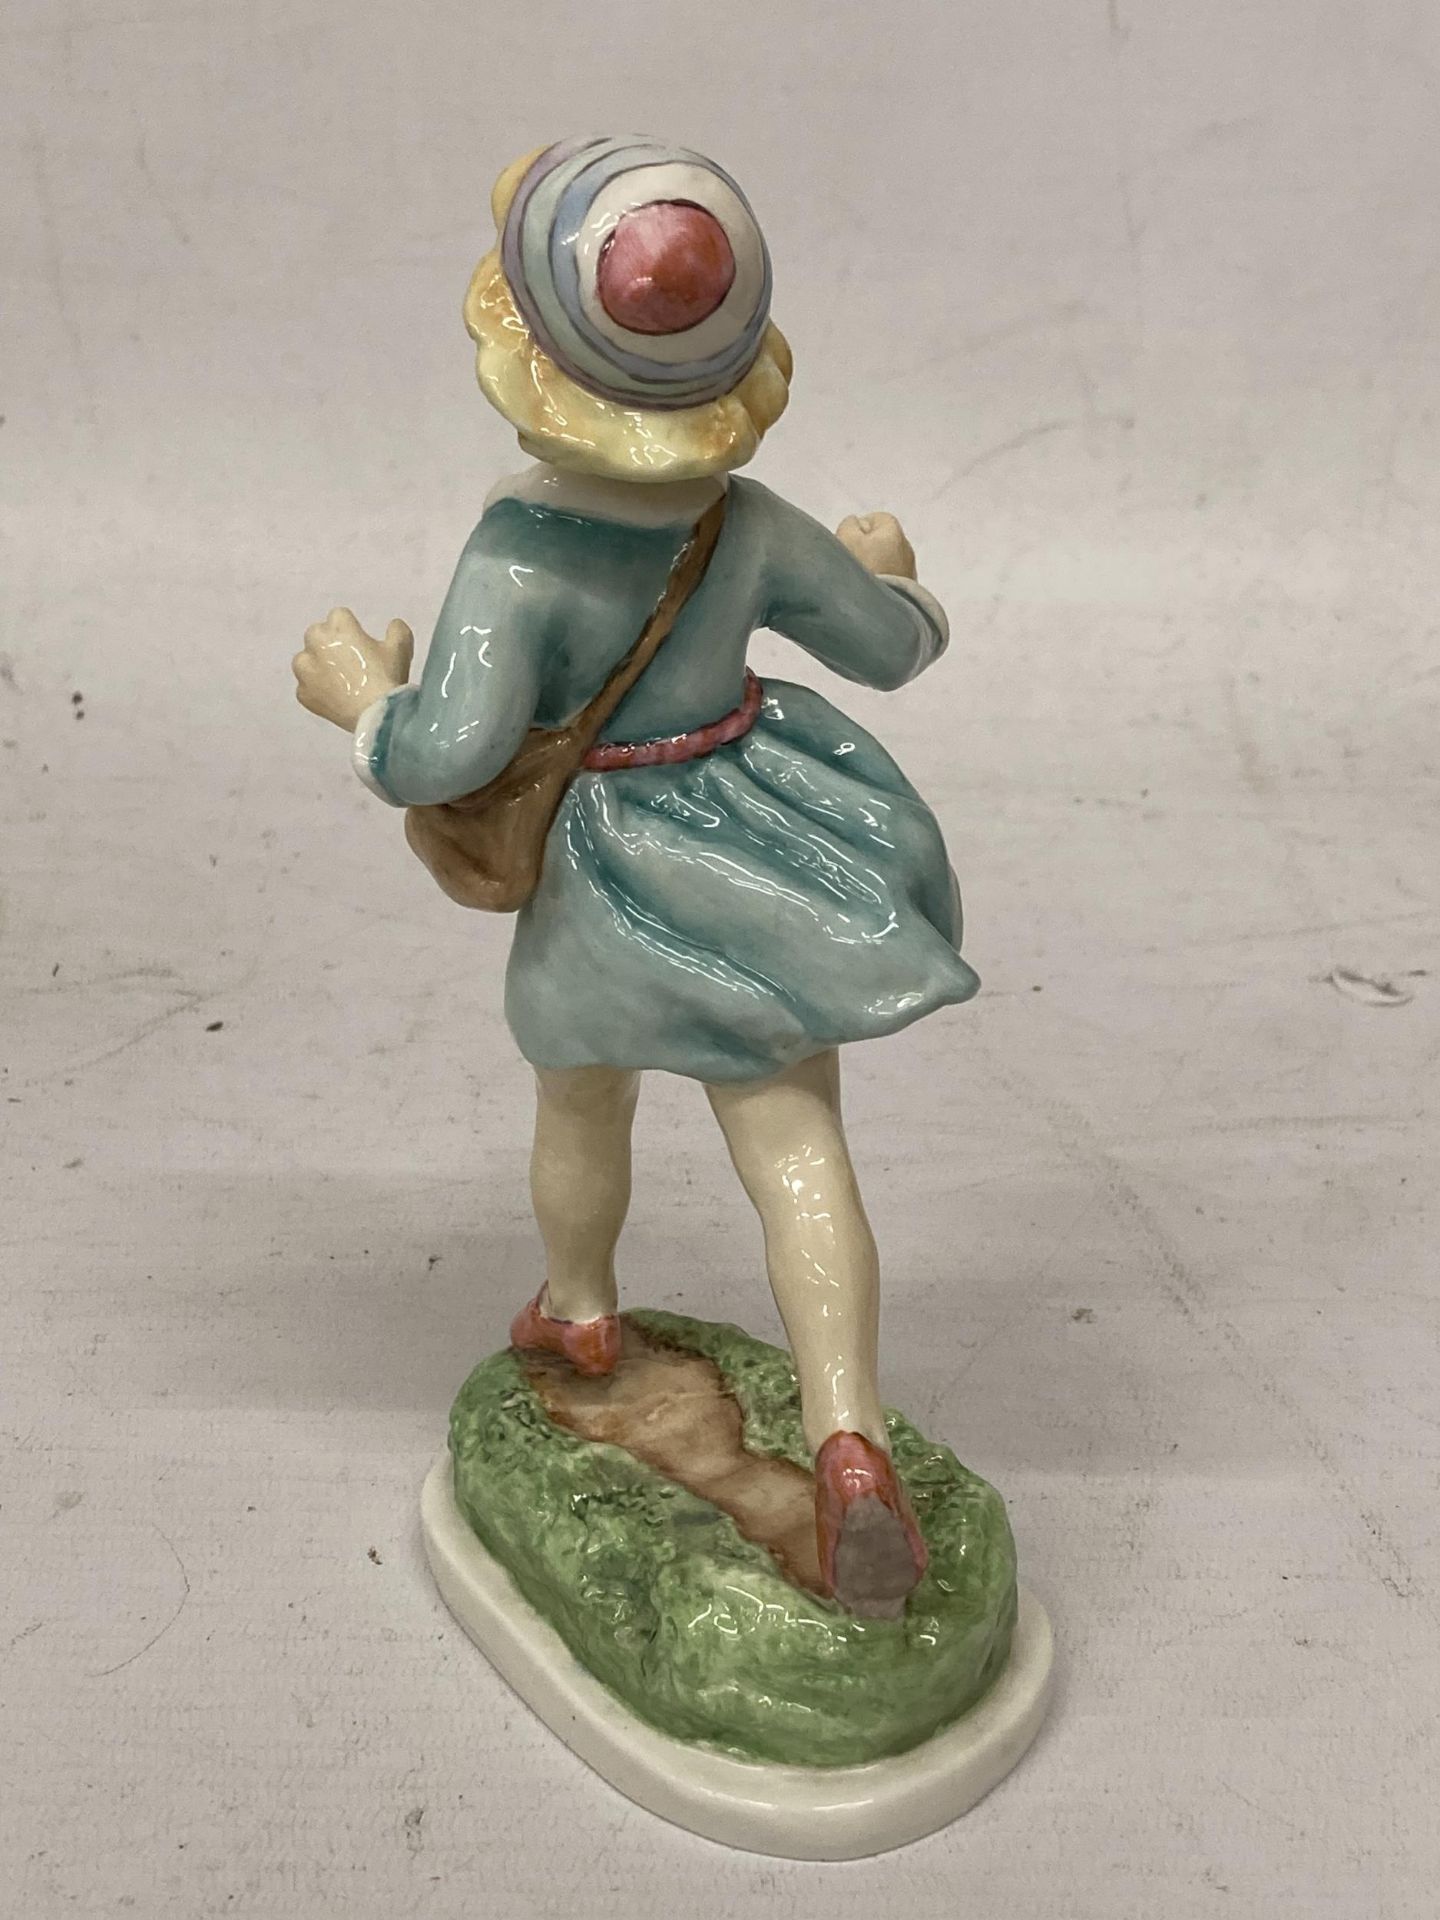 A ROYAL WORCESTER FIGURE "THURSDAY'S CHILD HAS FAR TO GO" 3522 - Image 4 of 5